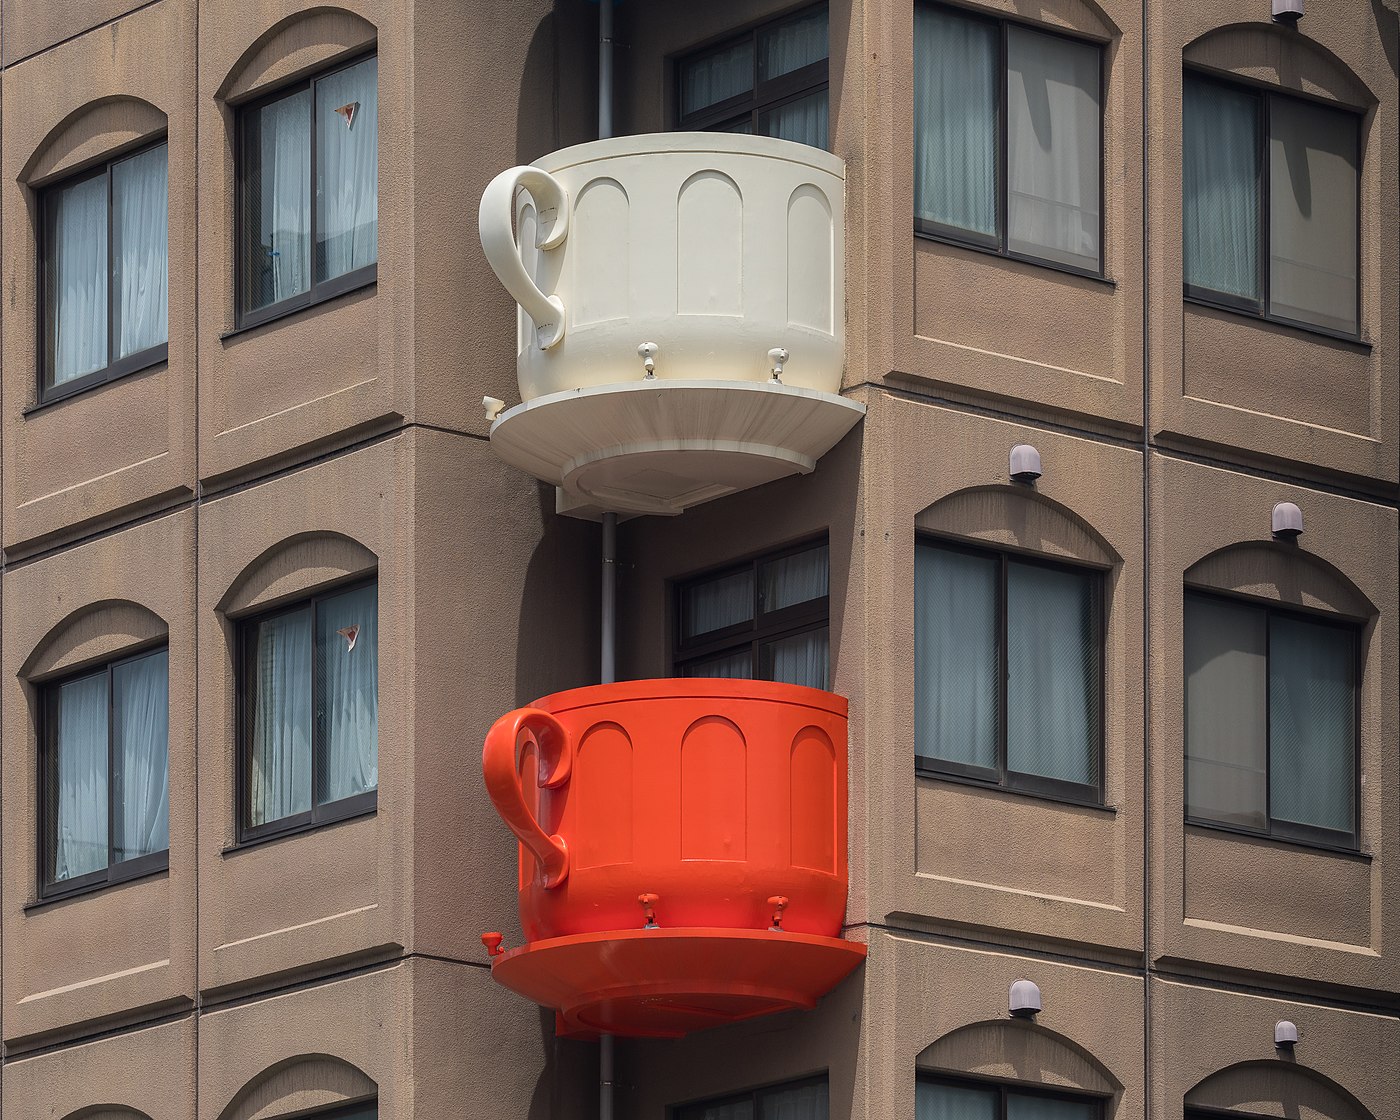 Cream and red coffee cup-shaped balconies Kappabashi, Tokyo